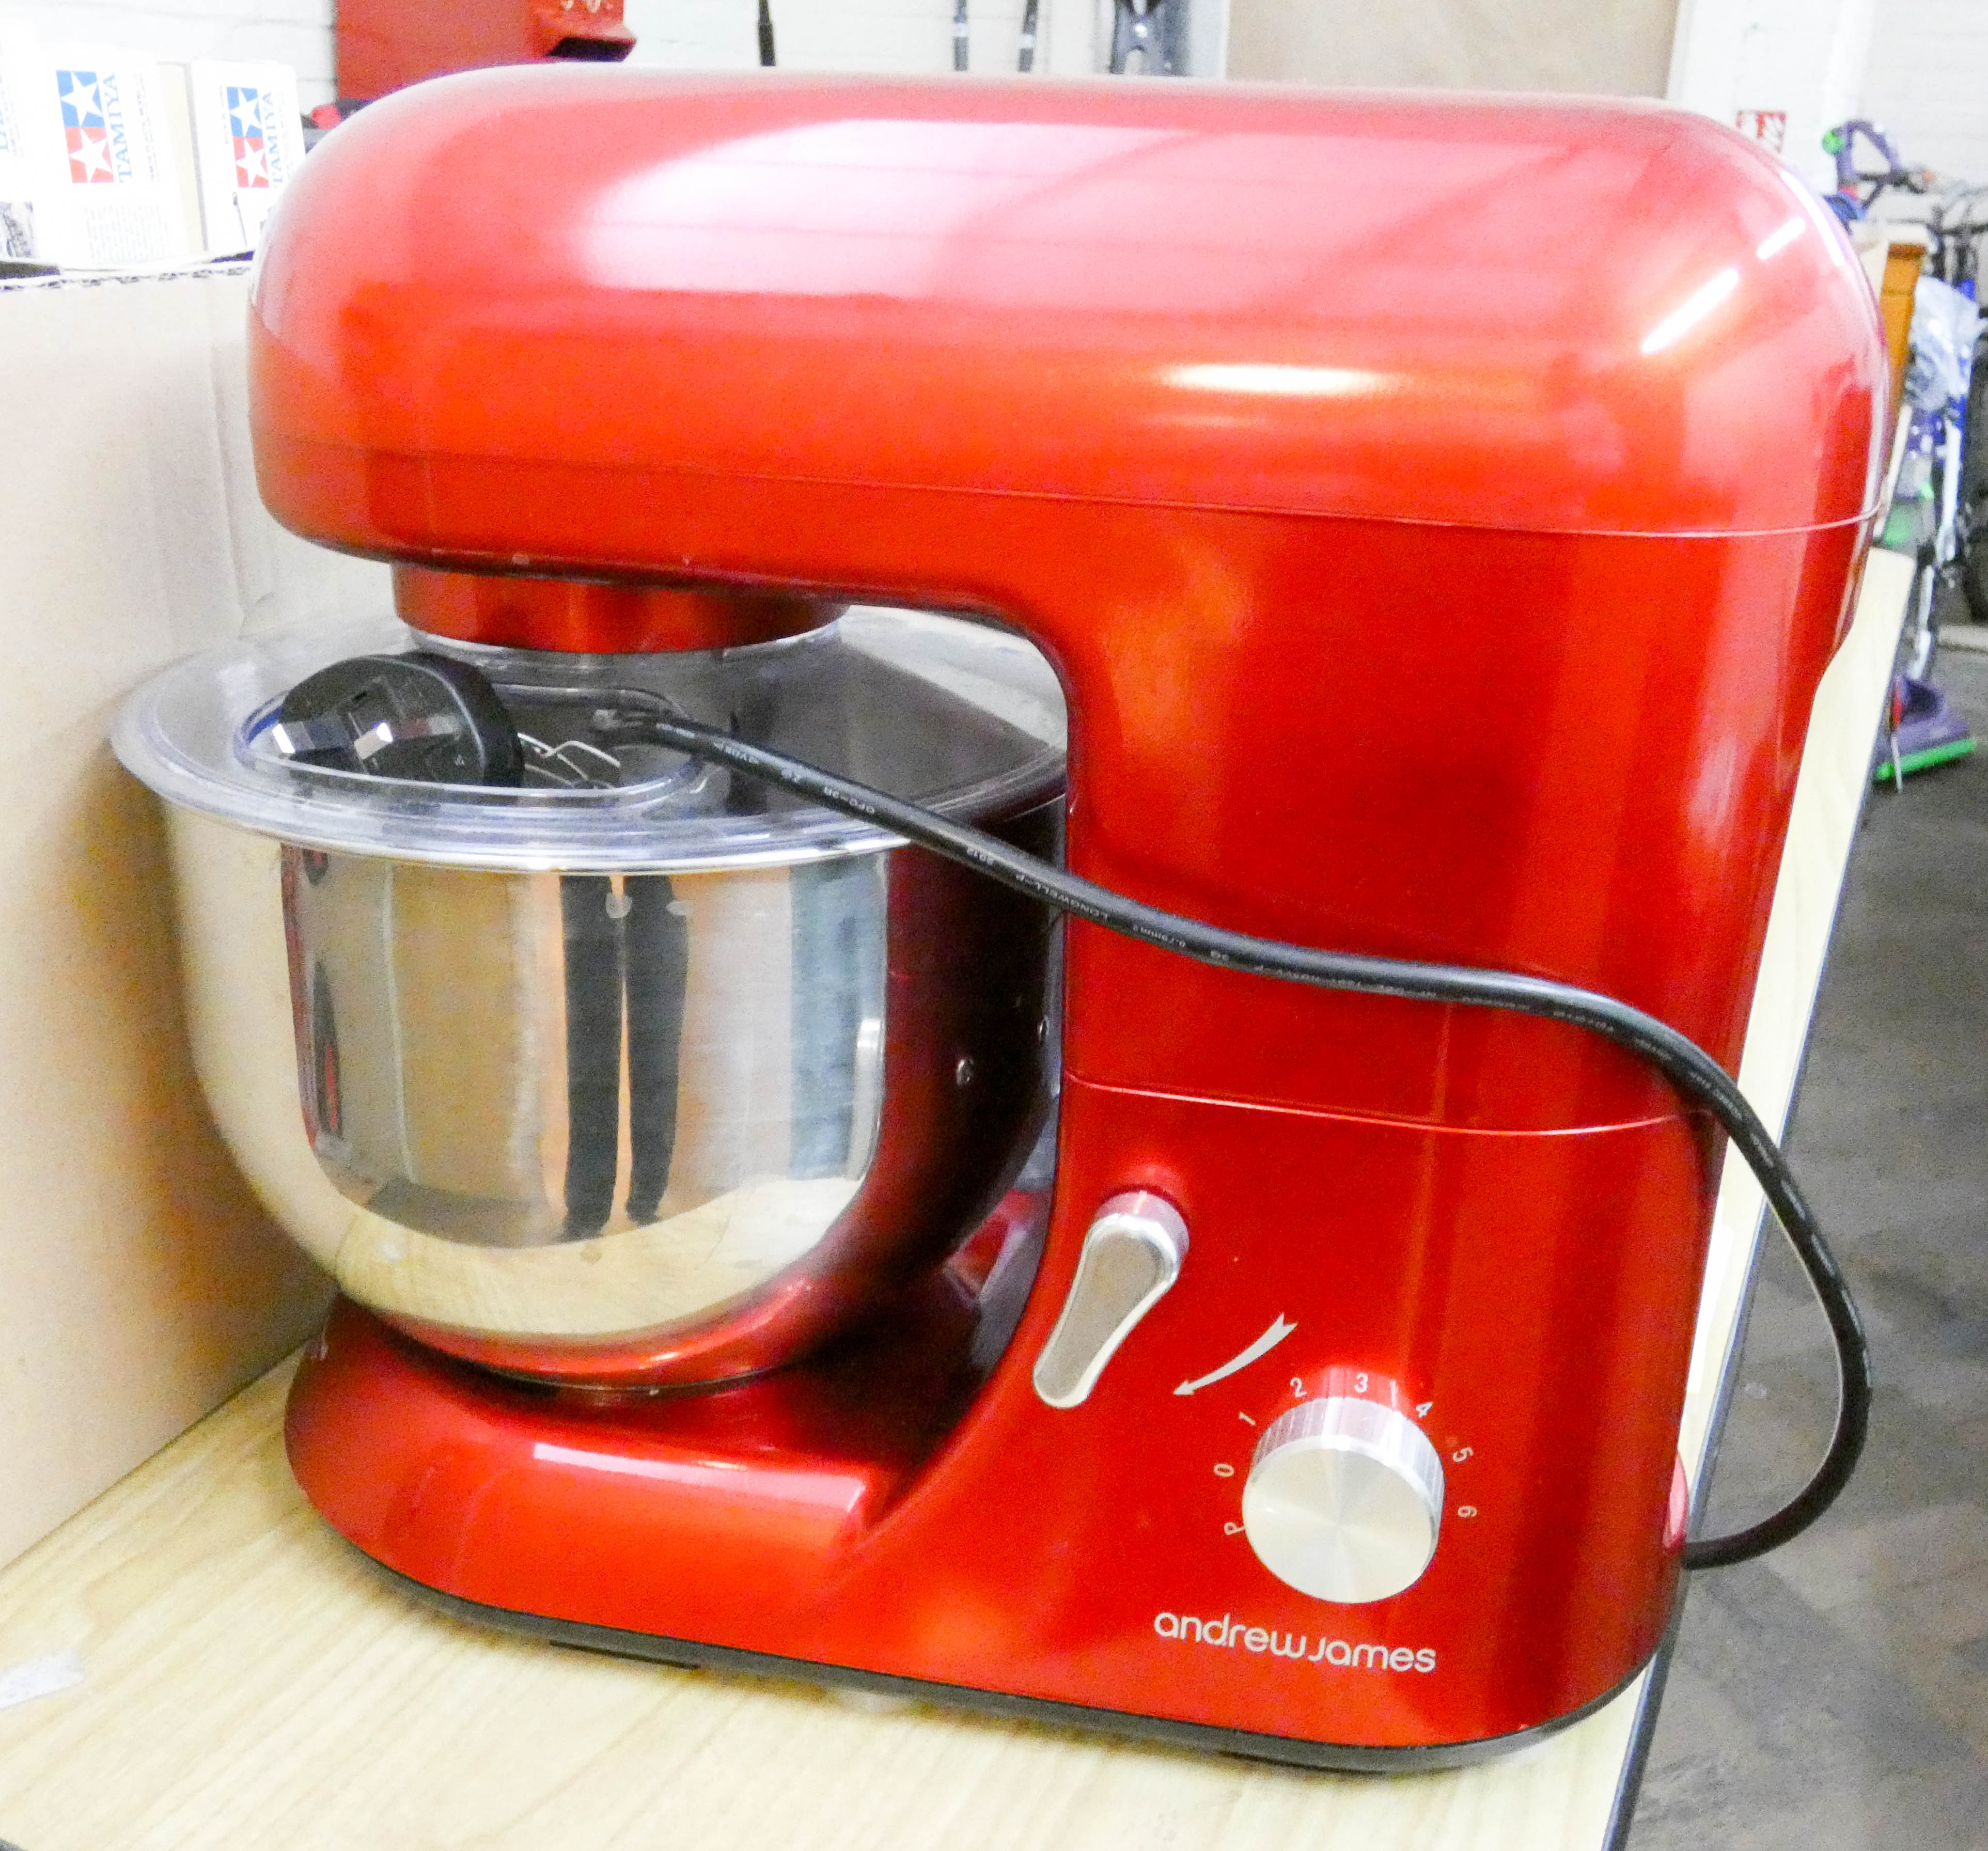 An Andrew James modern food mixer in red and chrome finish with accessories and books